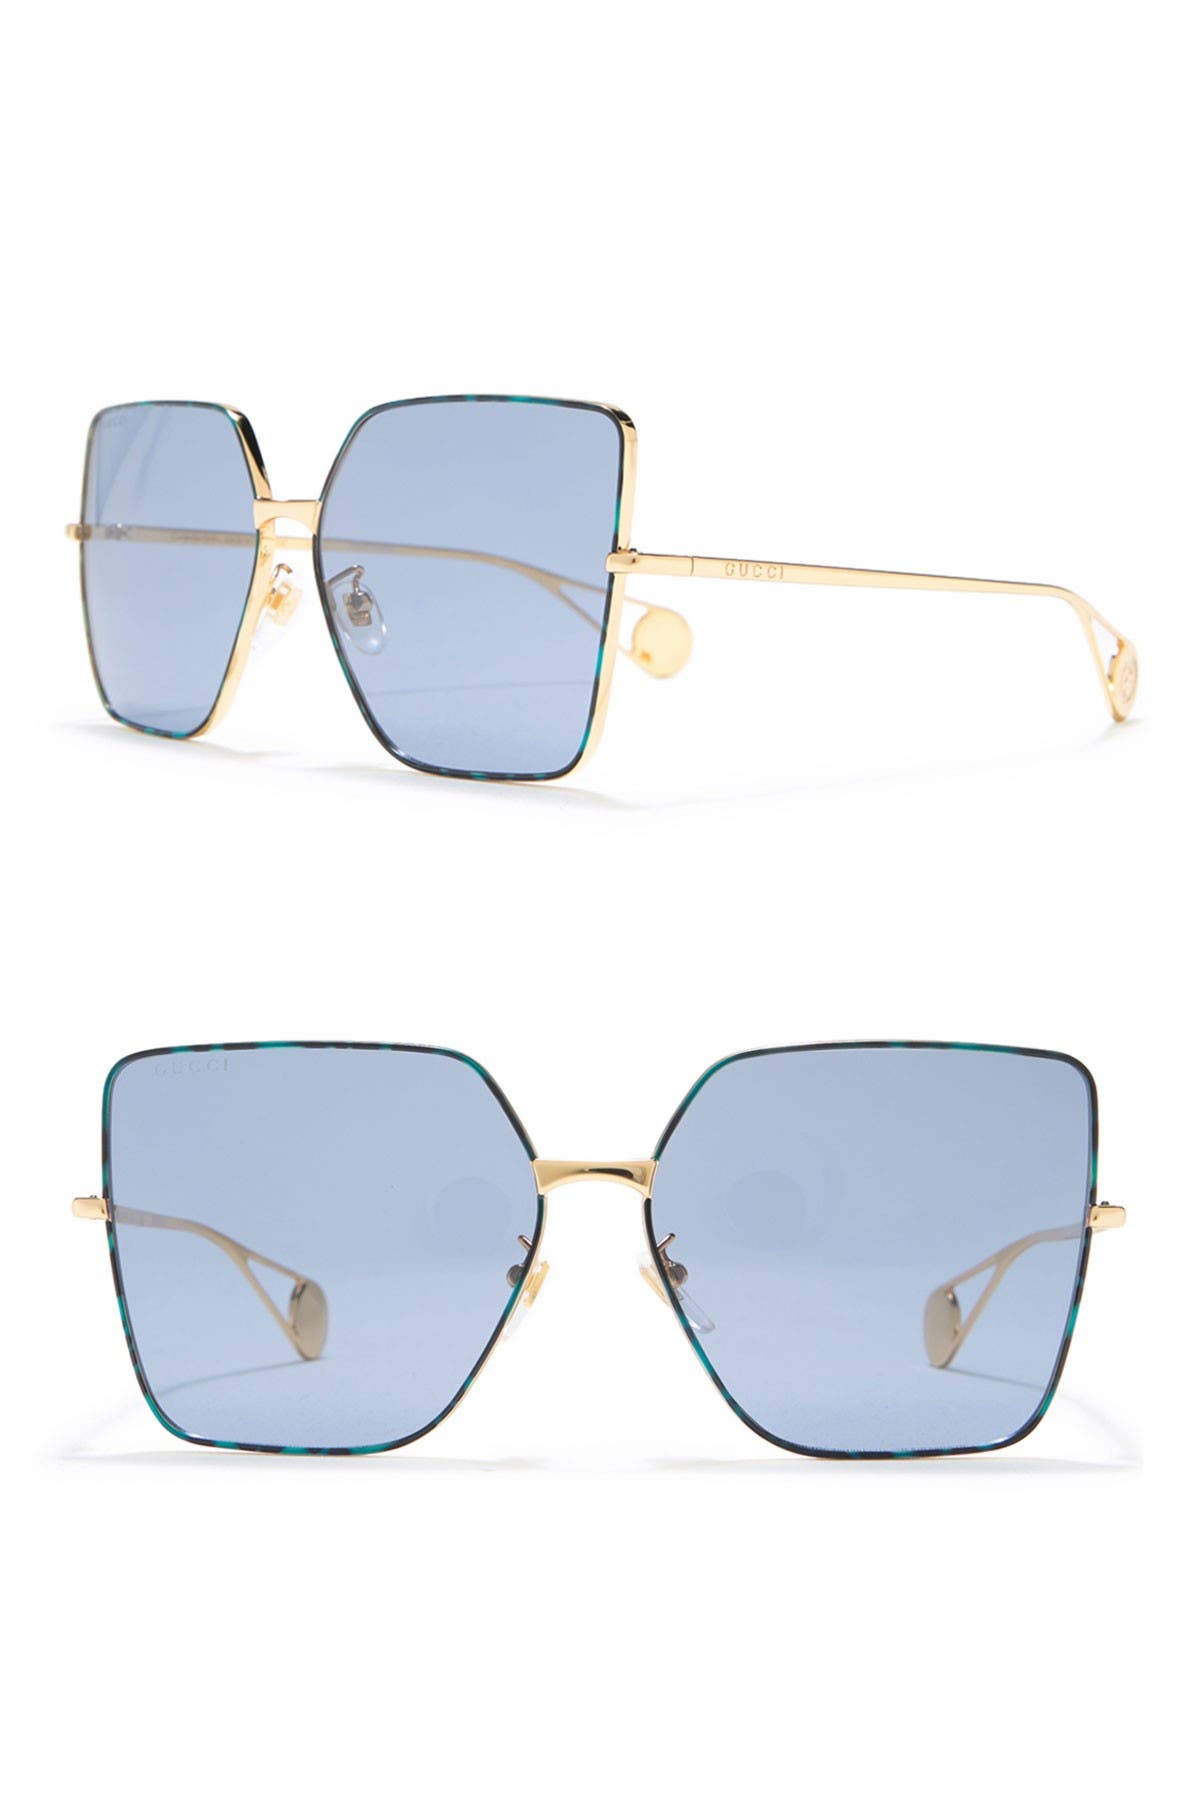 gucci butterfly sunglasses